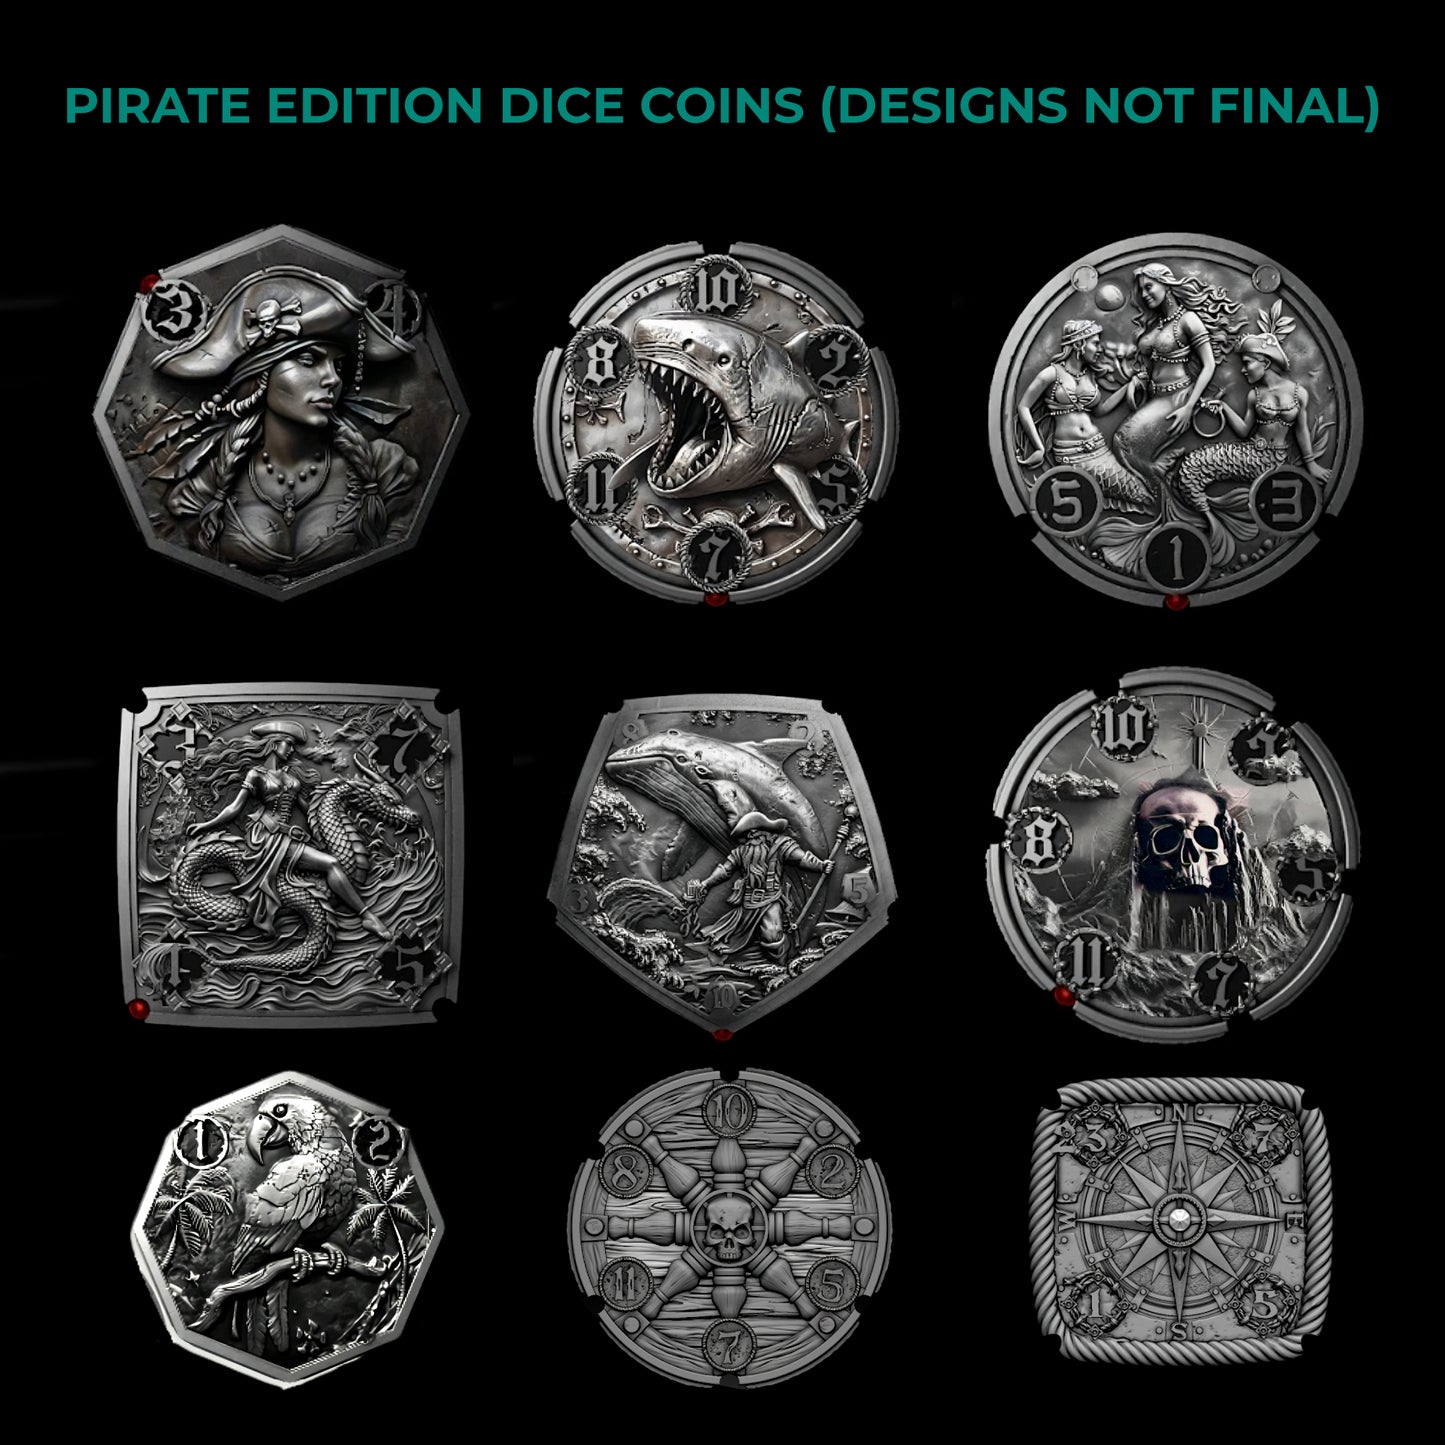 Flipdie Dice Coin - The First Dice You Flip Like a Coin